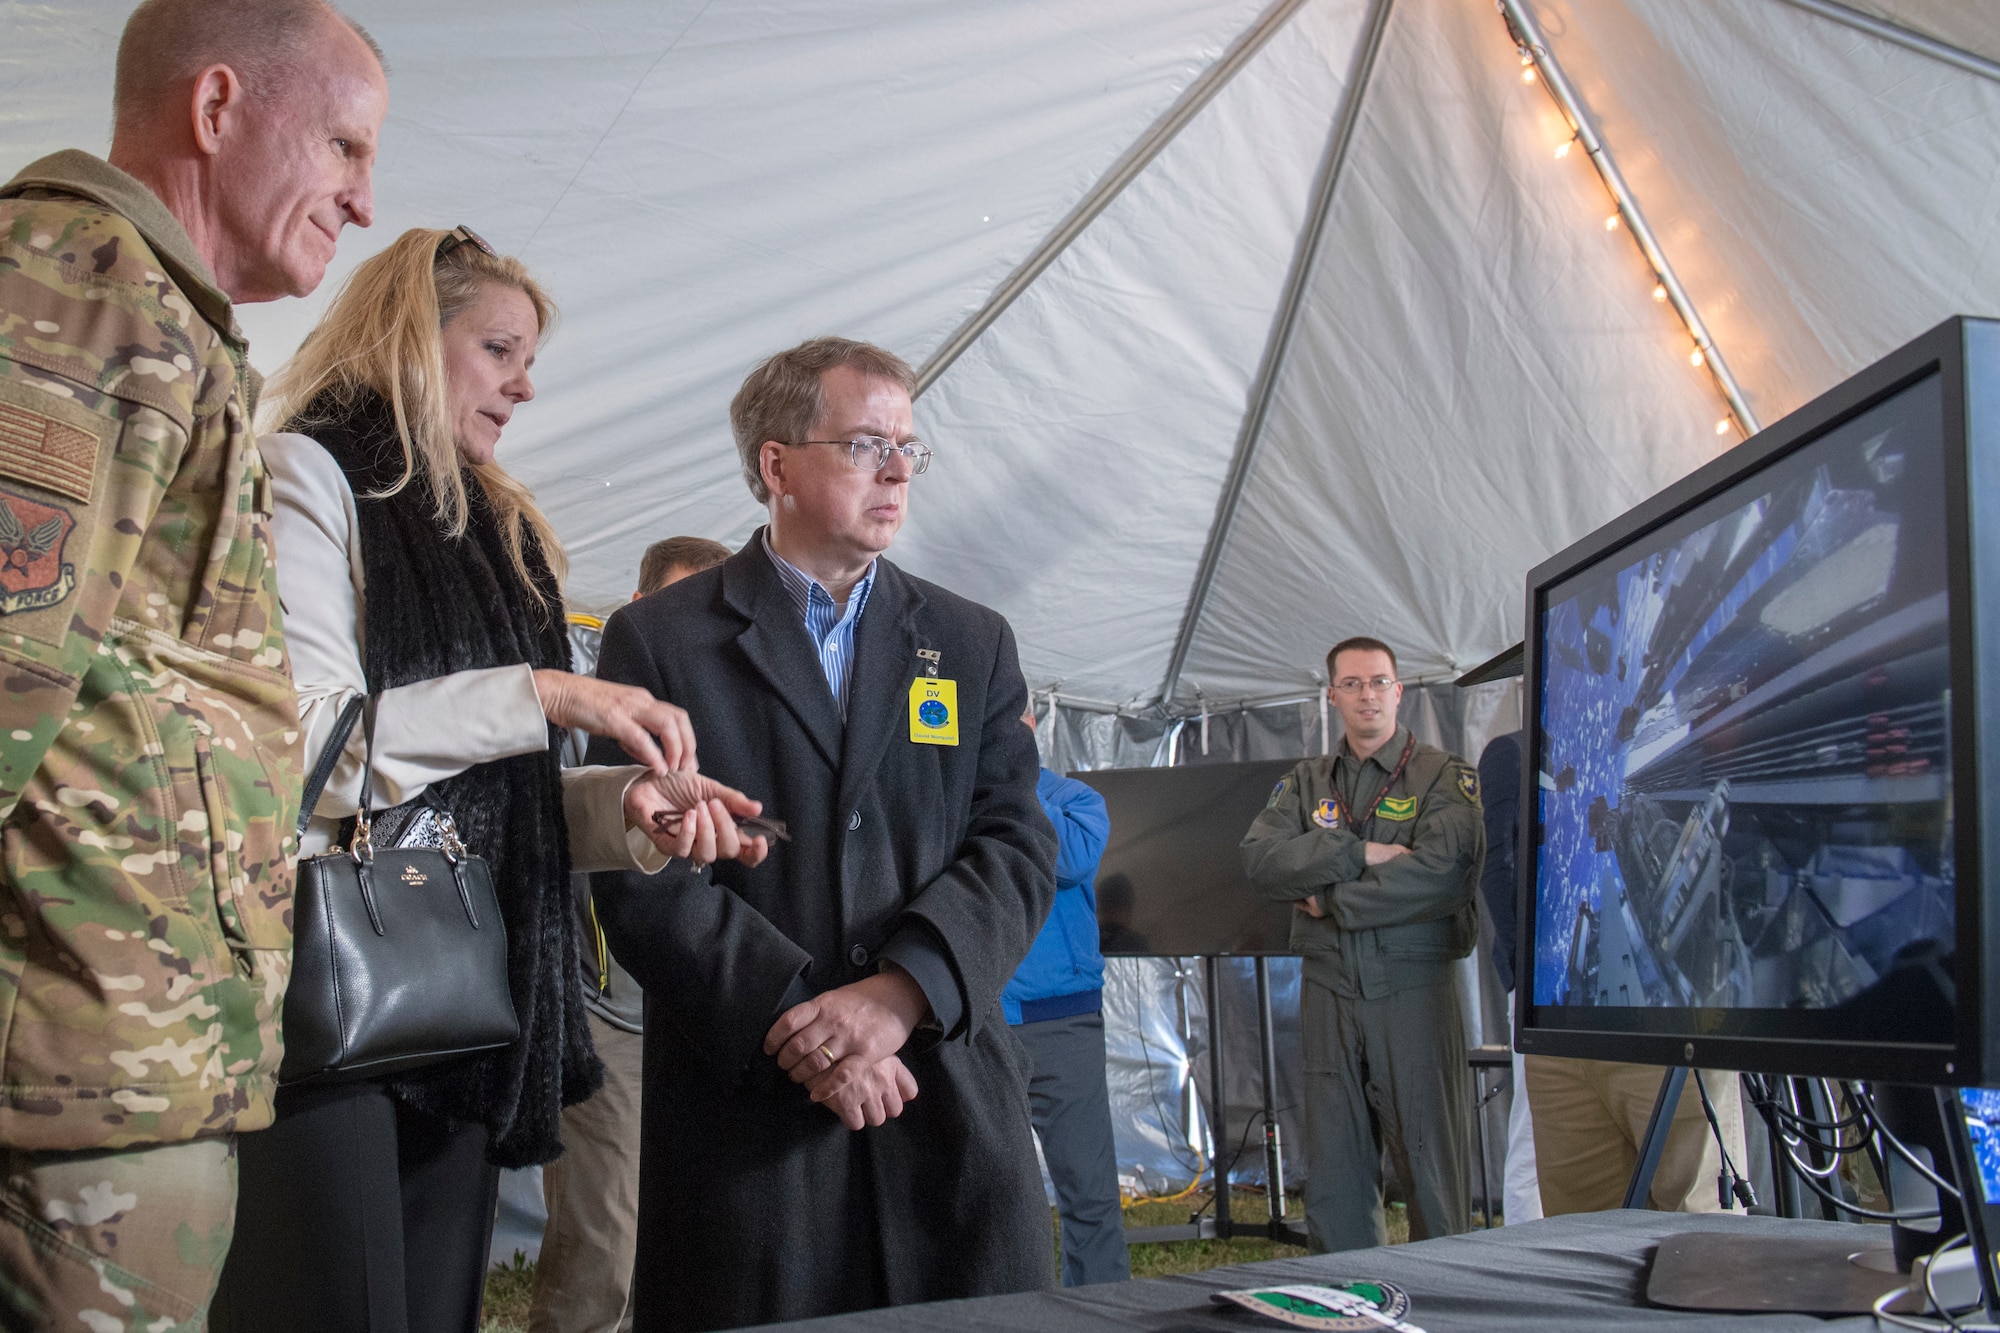 Gwynne Shotwell (center), SpaceX Chief Operating Officer, briefs Gen. Stephen W. Wilson, Vice Chief of Staff of the United States Air Force (left) and David Norquist, Deputy Secretary of Defense, on SpaceX capabilities during the Advanced Battle Management System (ABMS) demonstration at Eglin Air Force Base, Fla., Dec. 18, 2019. During this week’s first demonstration of the ABMS, operators across the Air Force, Army, Navy and industry tested multiple real time data sharing tools and technology in a homeland defense-based scenario enacted by U.S. Northern Command and enabled by Air Force senior leaders. The collection of networked systems and immediately available information is critical to enabling joint service operations across all domains.(U.S. Air Force photo by Tech. Sgt. Joshua J. Garcia)